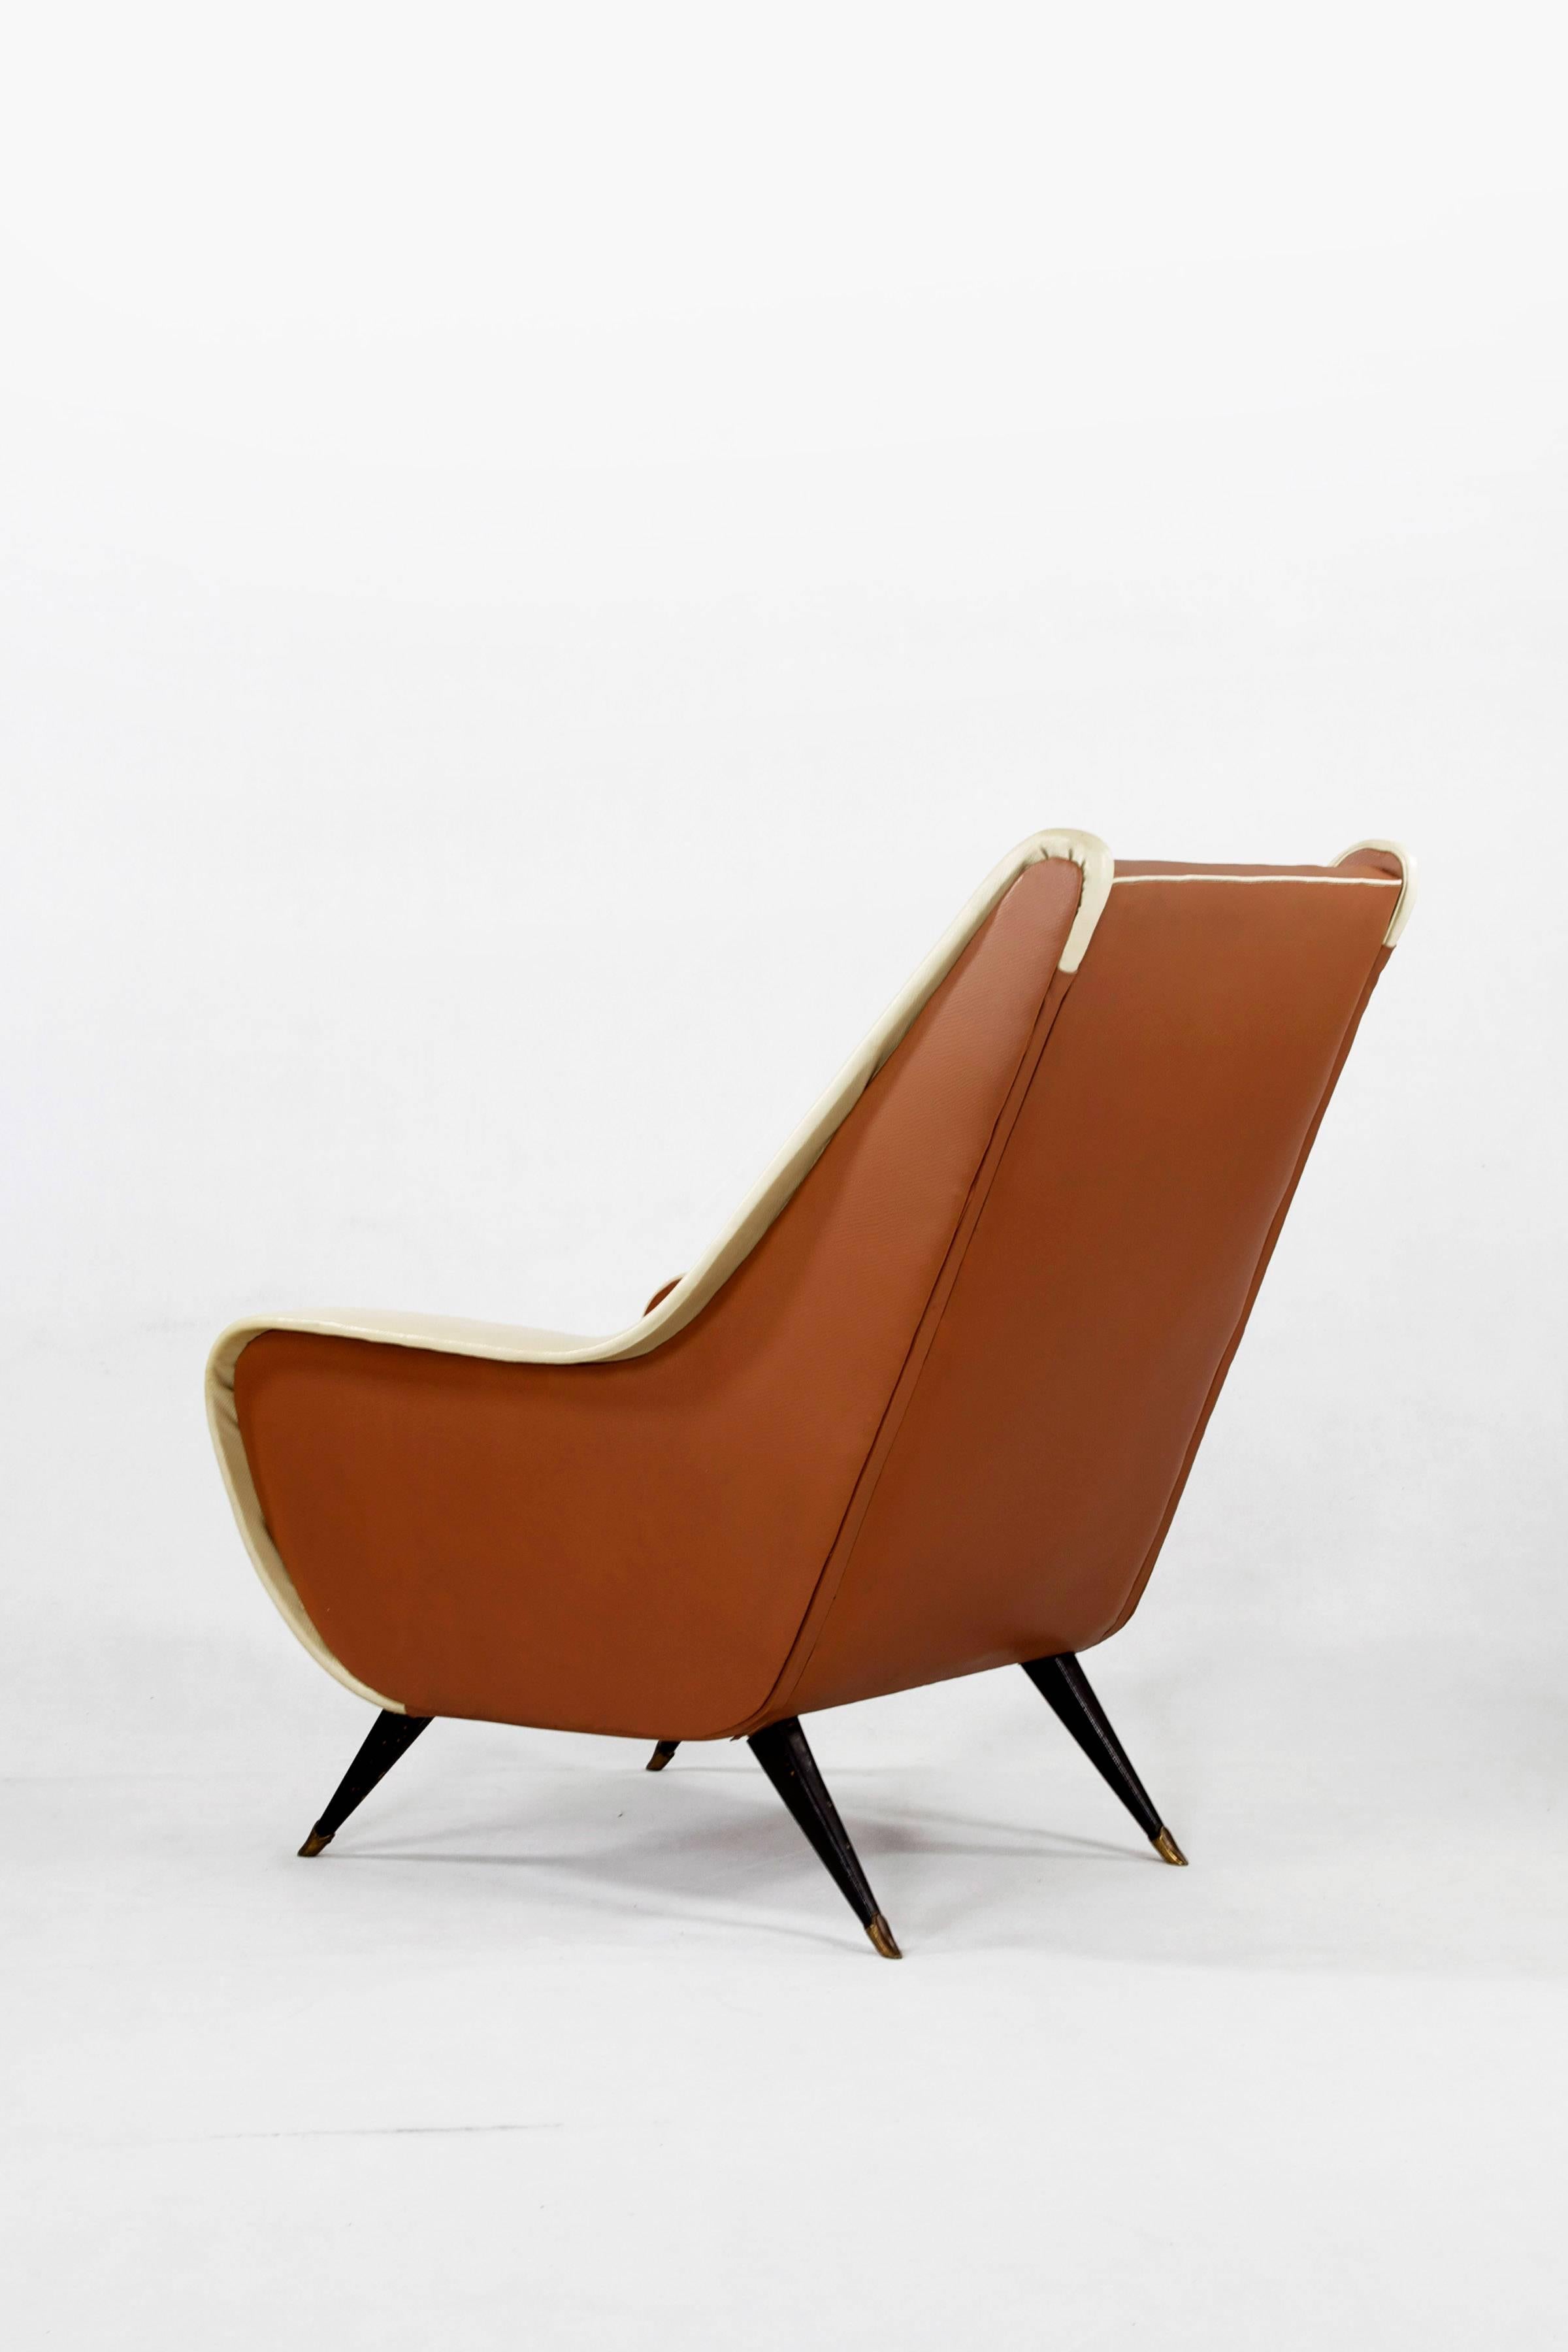 Mid-Century Modern Italian Chair in Two-Tone Look of Brown and Beige Faux Leather, 1950